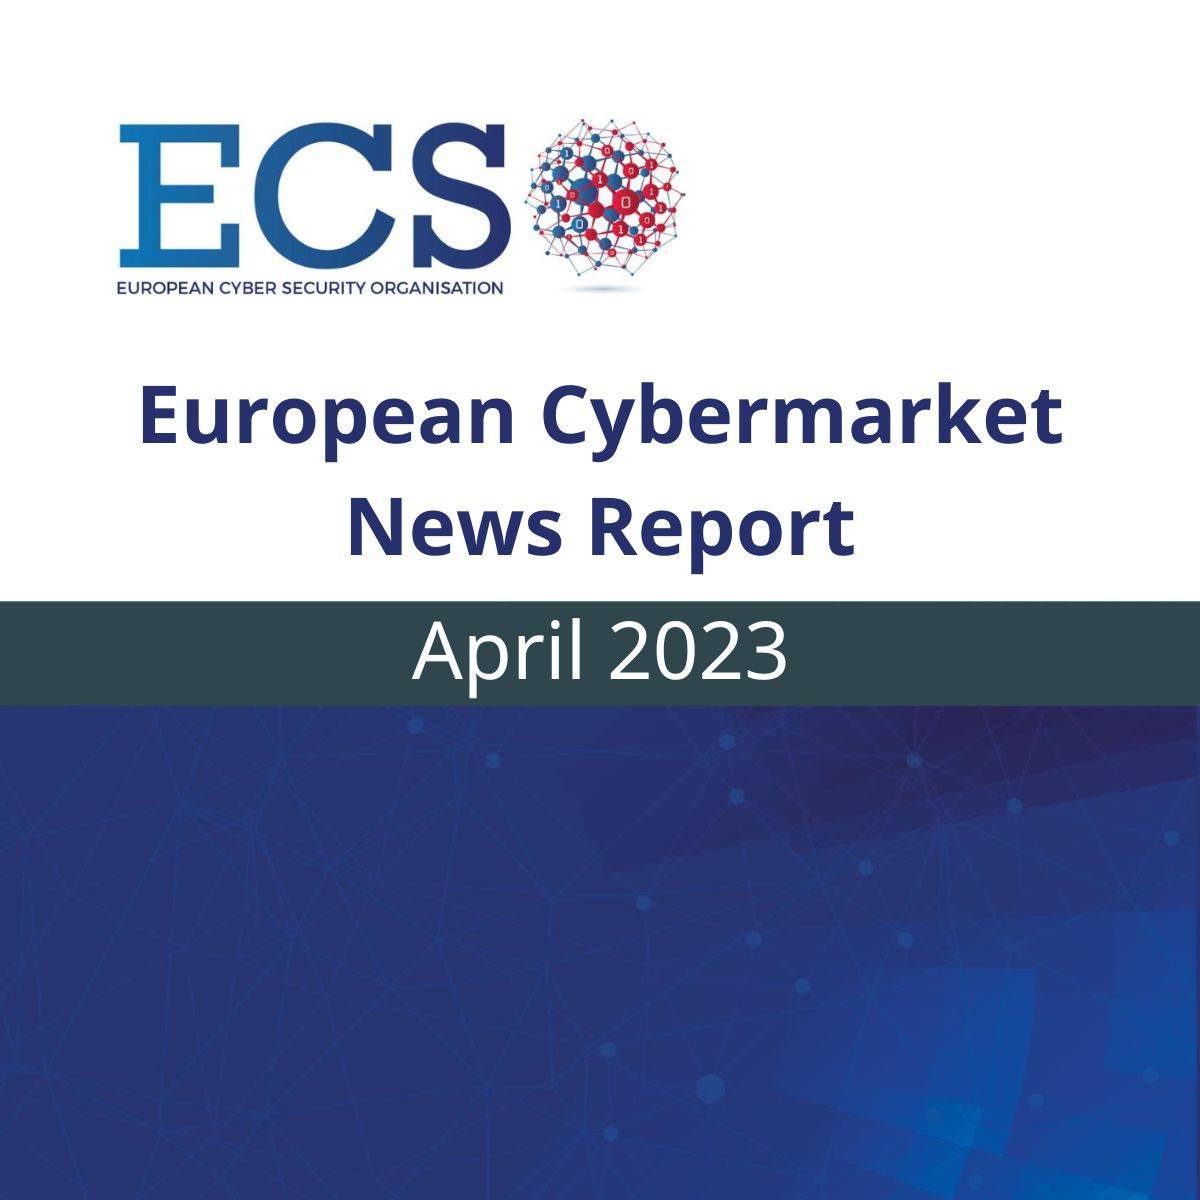 The visual for ECSO's European Cybermarket News Report April 2023